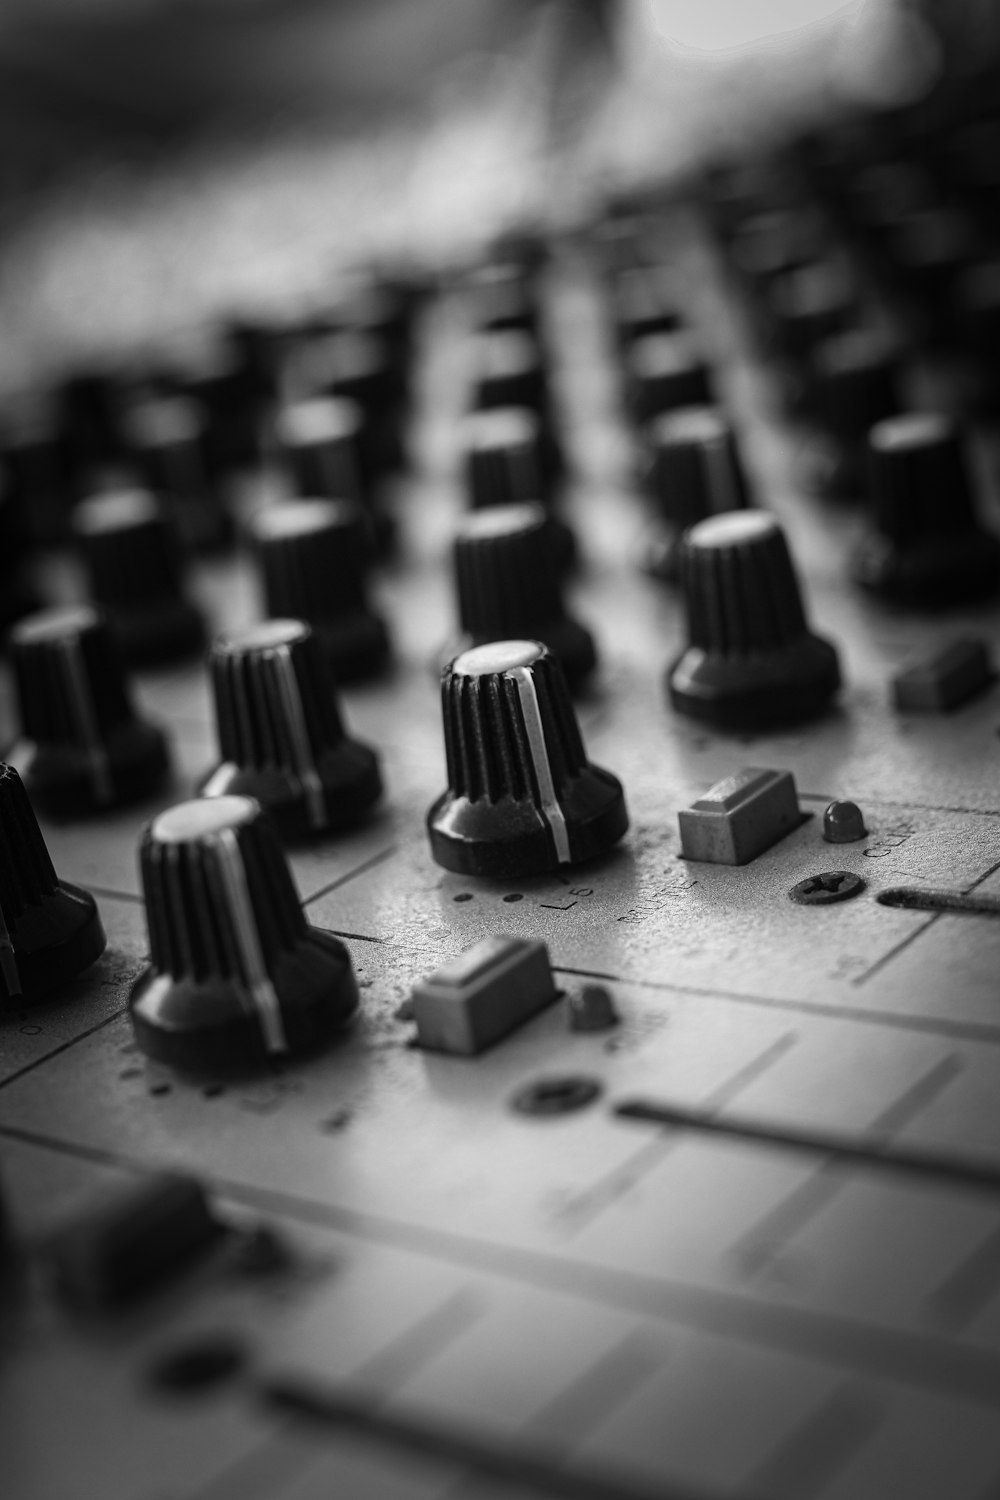 a close up of a mixing board with knobs